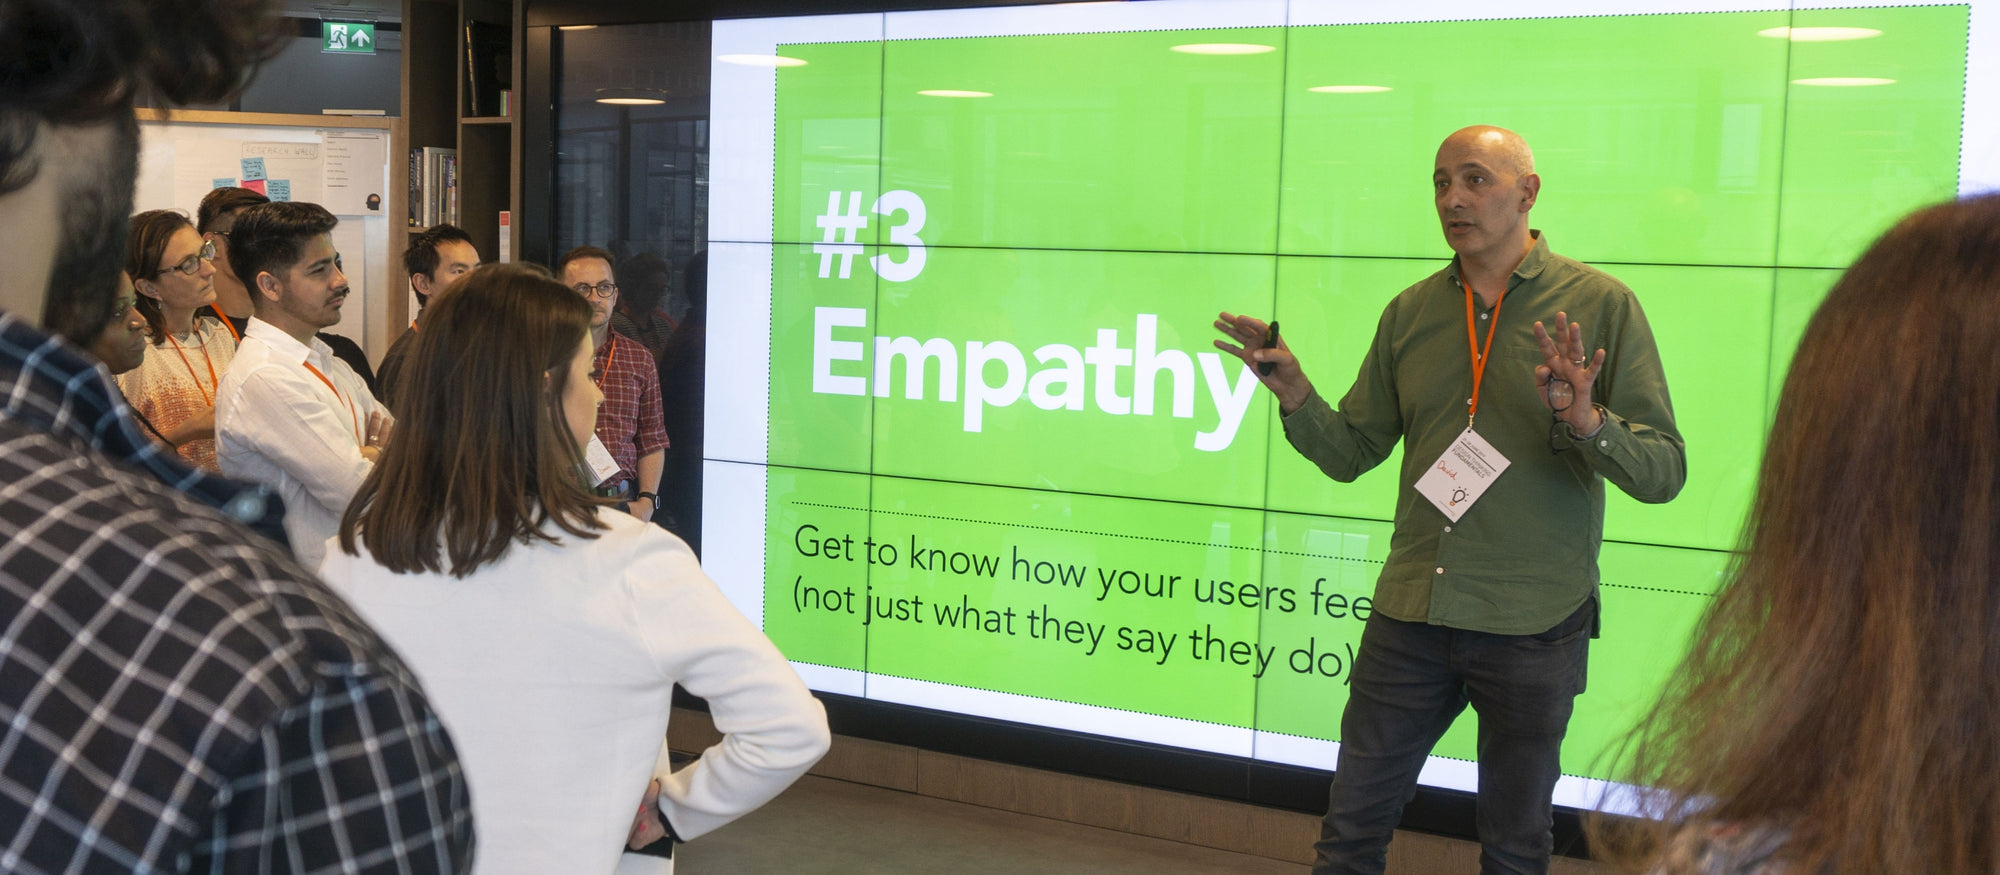 David Kester teaching a group of people about the importance of empathy in user research